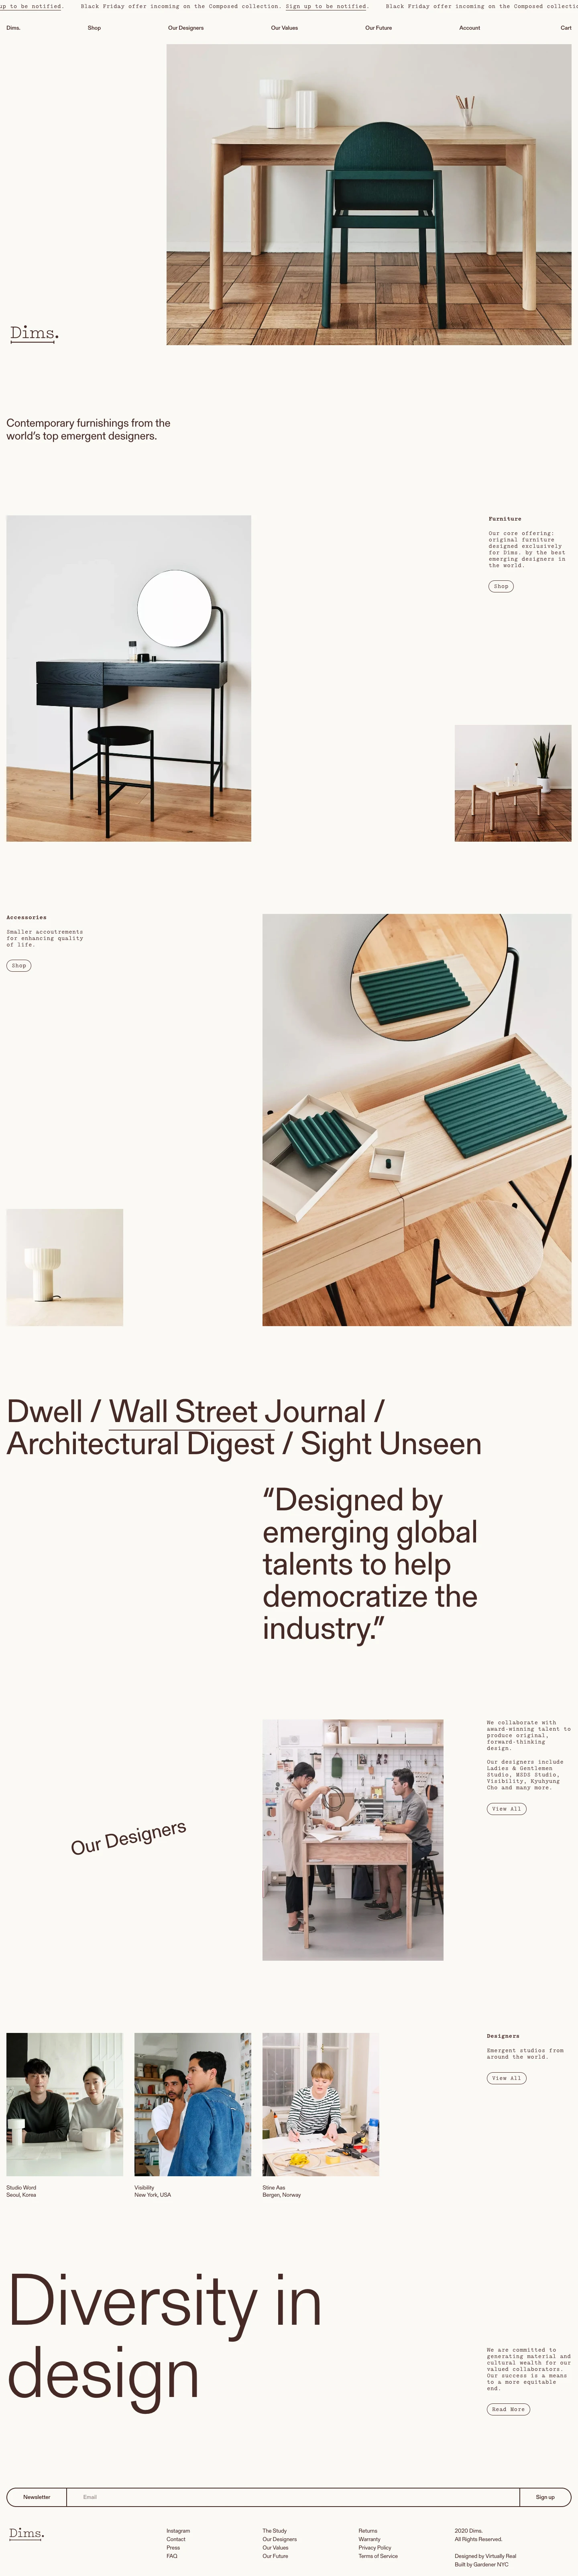 Dims. Landing Page Example: Contemporary furnishings from the best emergent designers in the world.